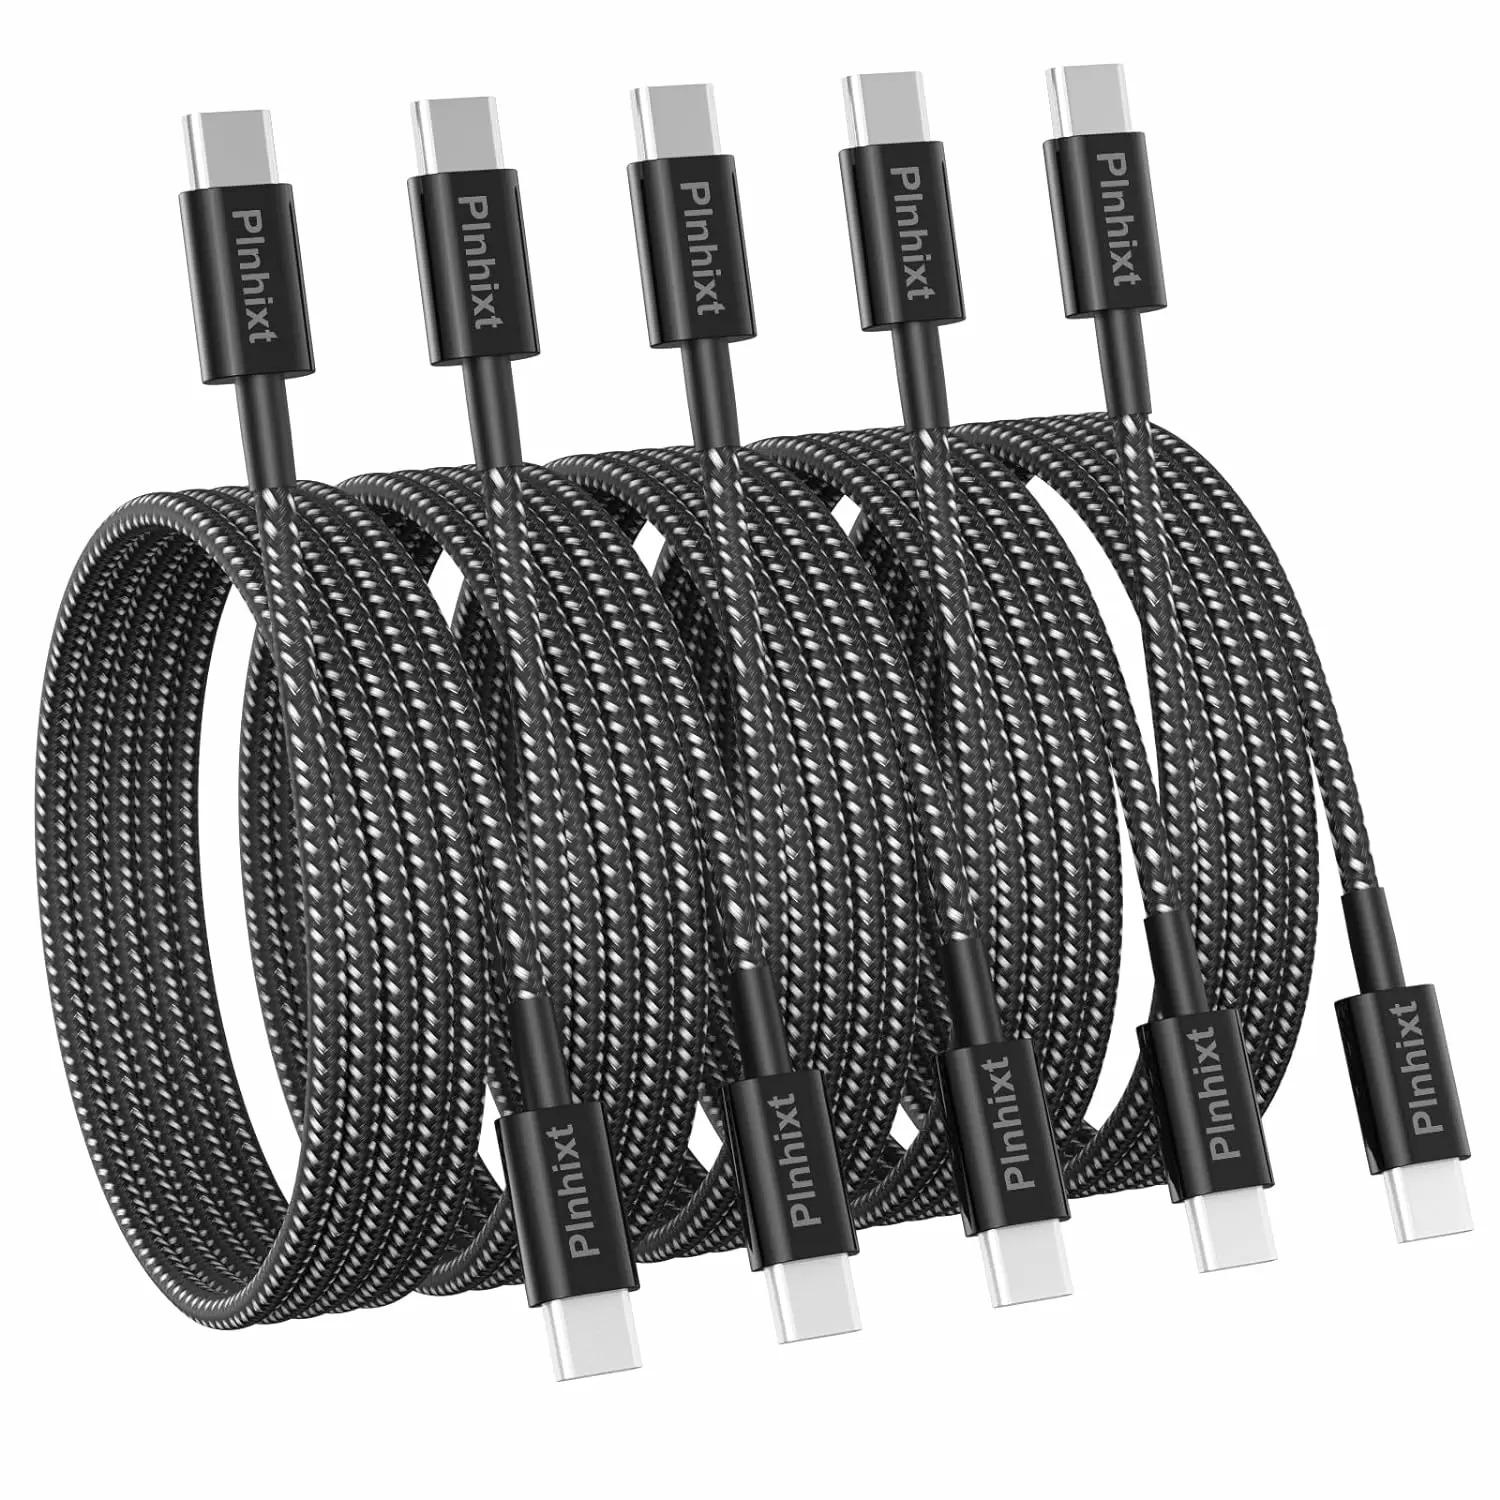 USB C to USB C 6ft Charger Cables 5 Pack for $4.48